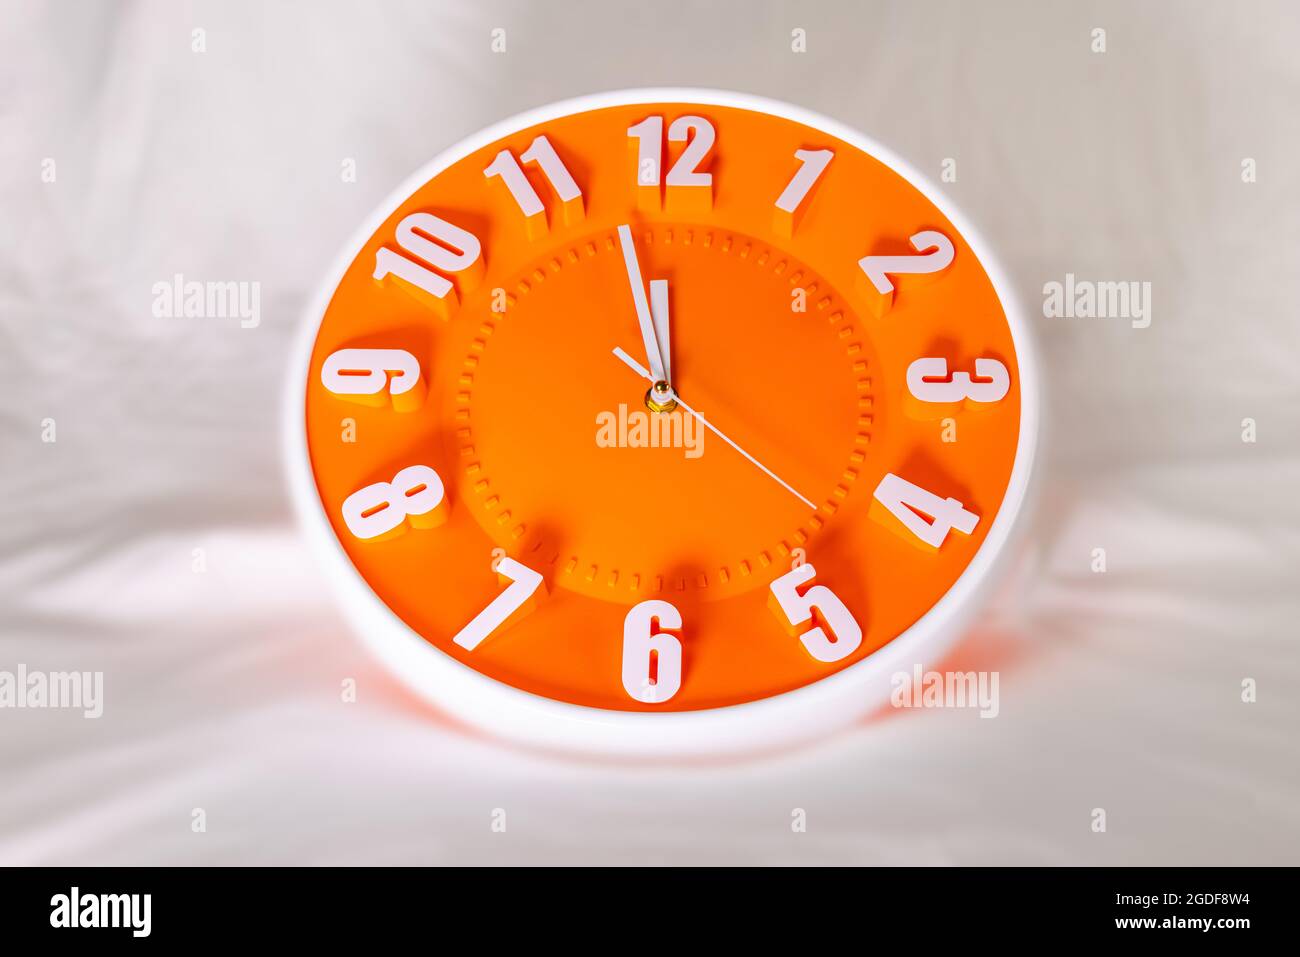 Orange clock face of a wall clock show the time. It's close to 12 o'clock. The latest report of the atomic scientist shows the doomsday clock Stock Photo